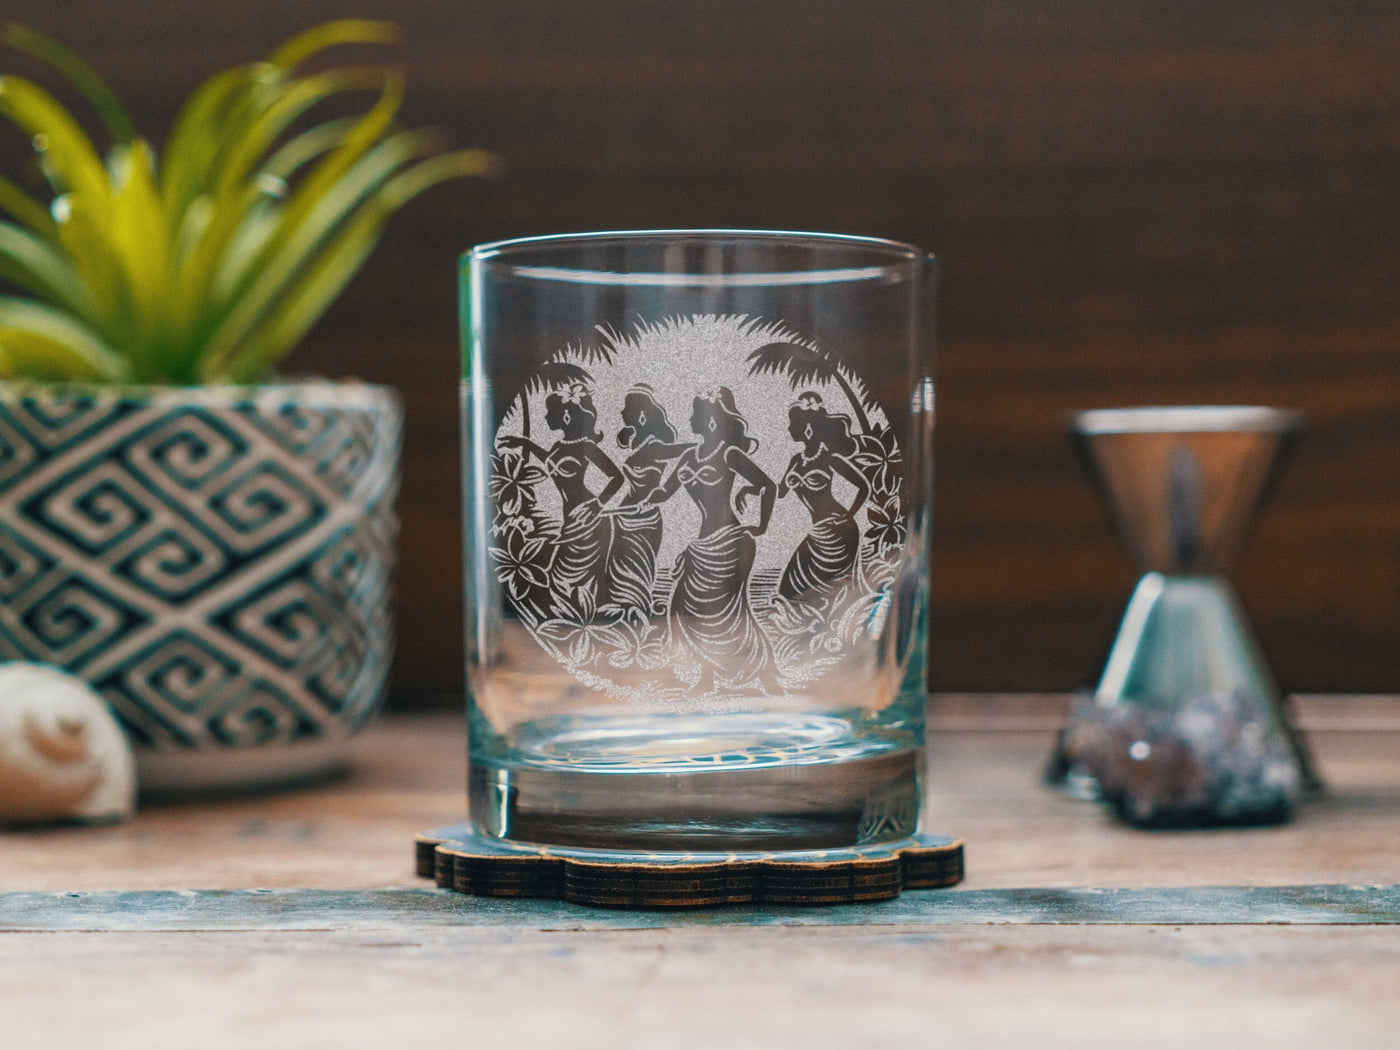 Island Dancers Glasses | Personalized etched beer, whiskey, wine & cocktail glassware. Beach Coast Lifestyle gift, Tropical Summer Vibes.